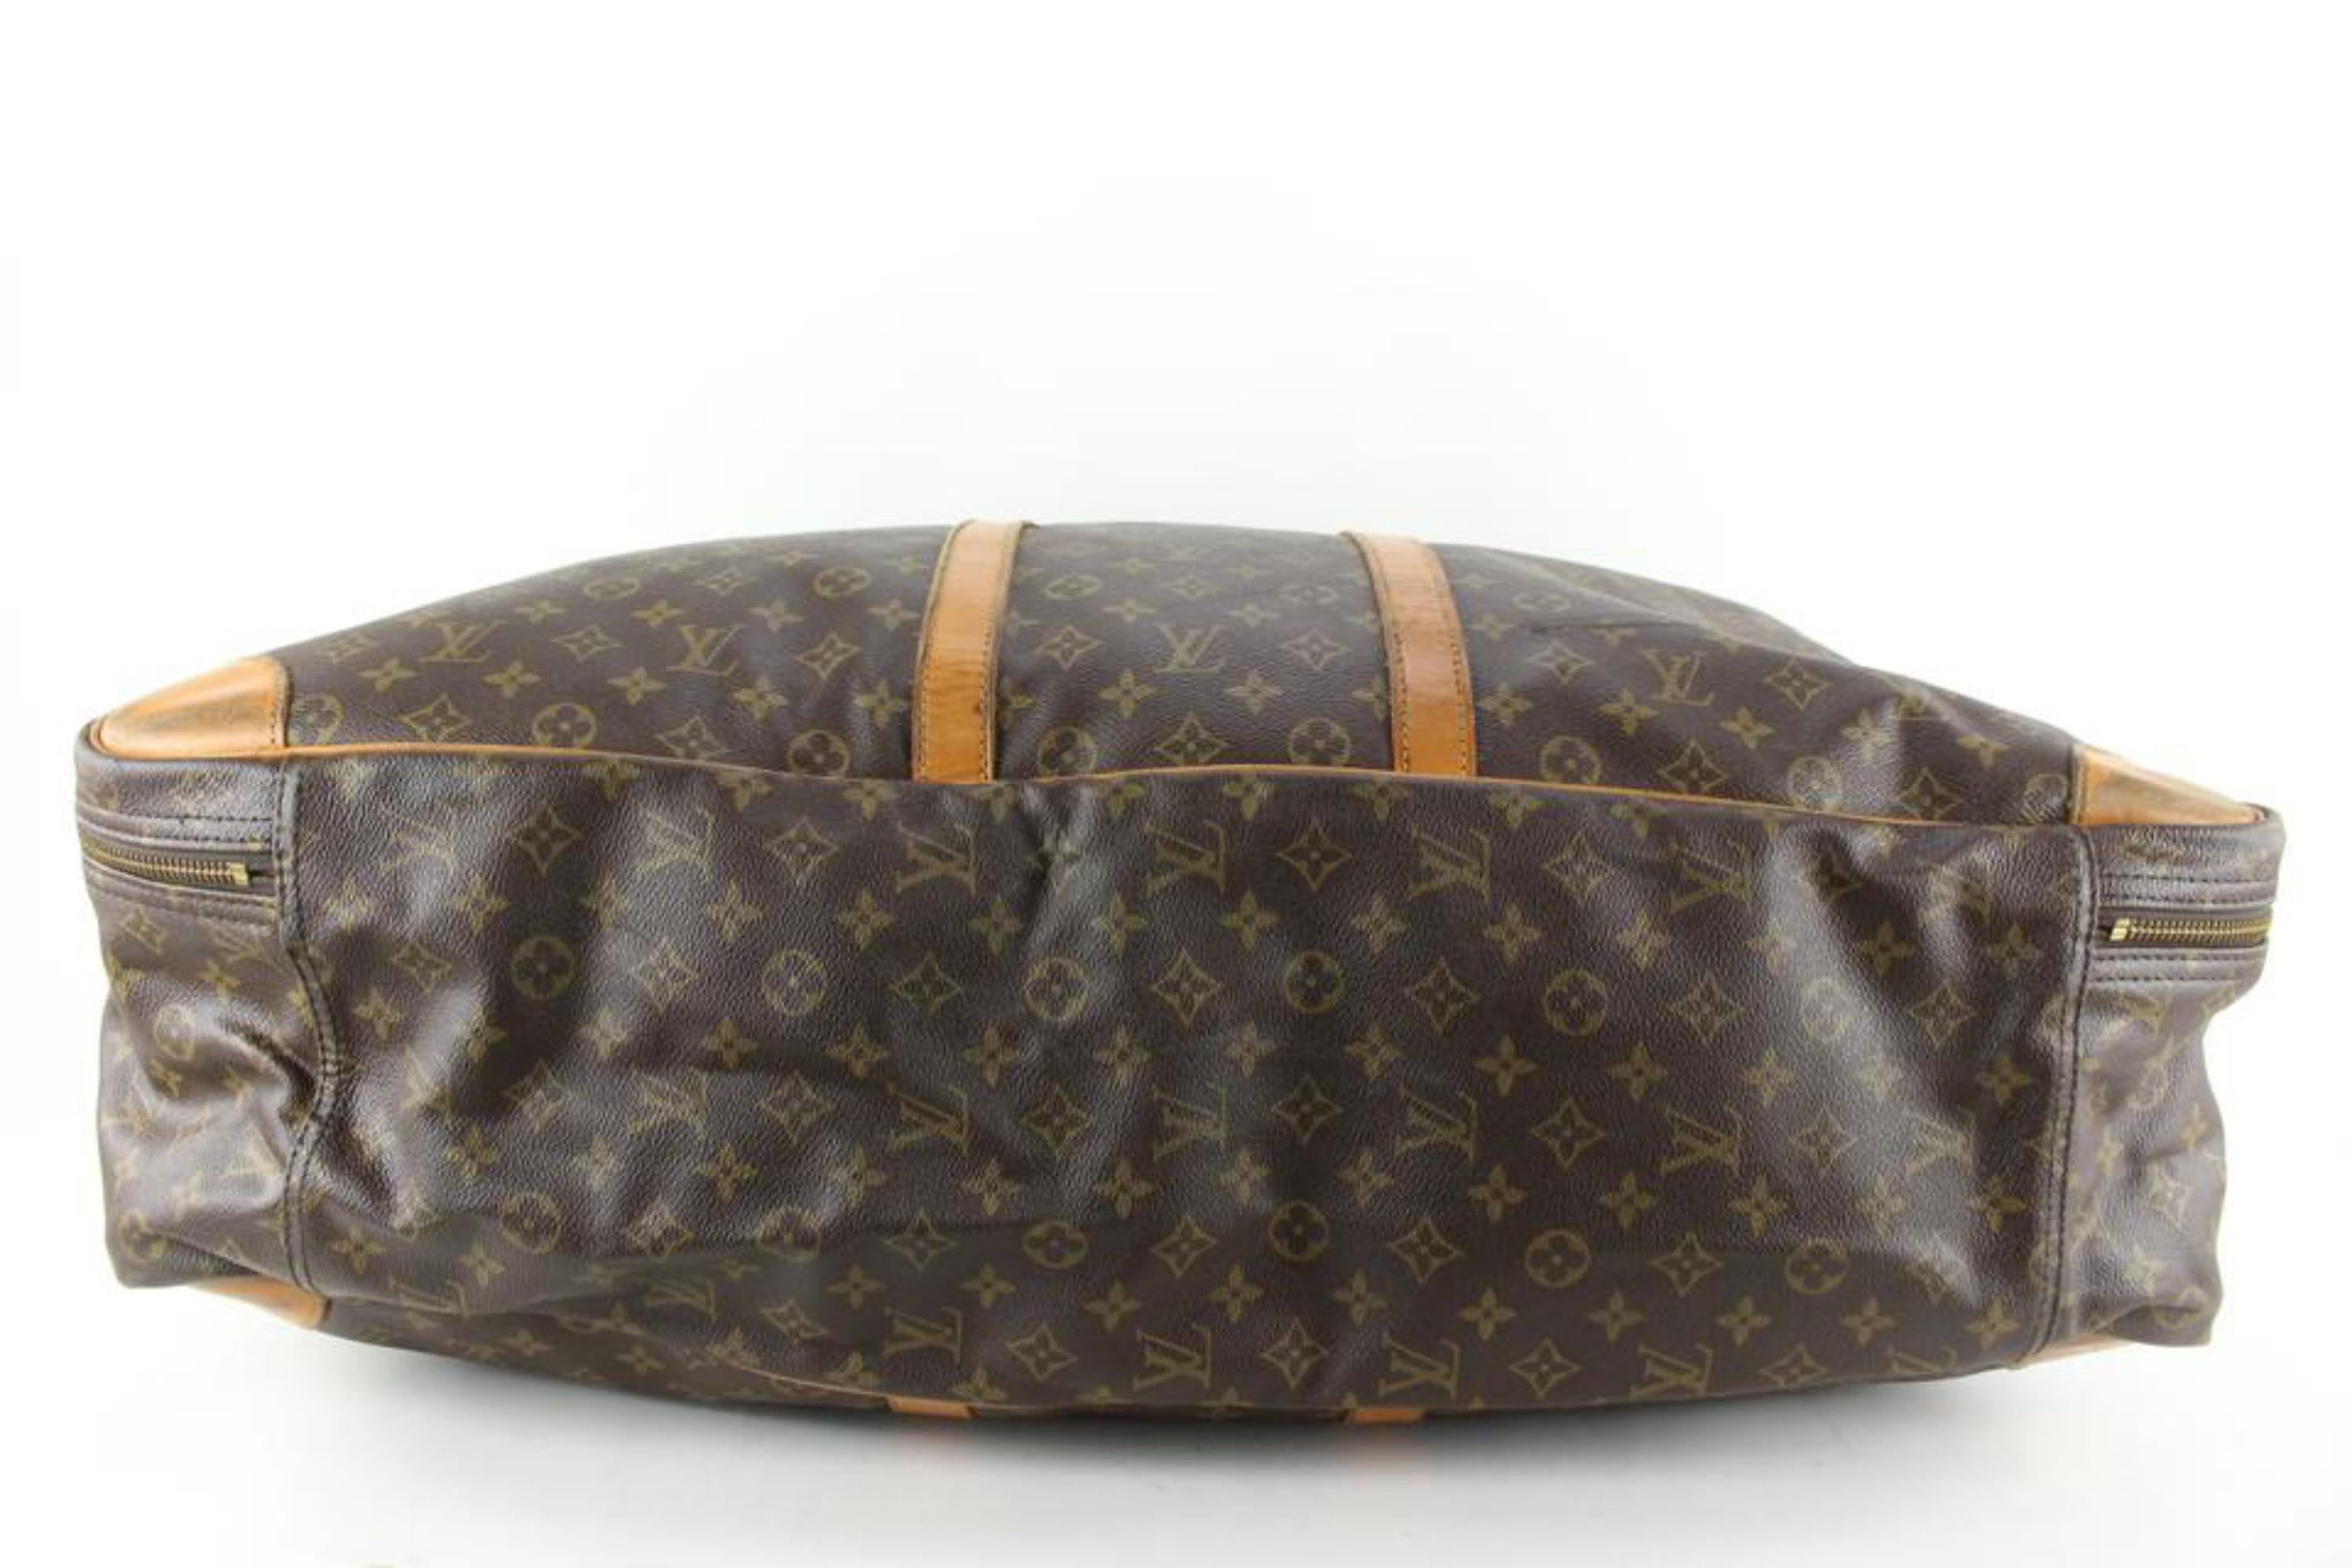 Louis Vuitton XL Monogram Sirius 70 Soft Trunk Luggage 77lk78s In Fair Condition For Sale In Dix hills, NY